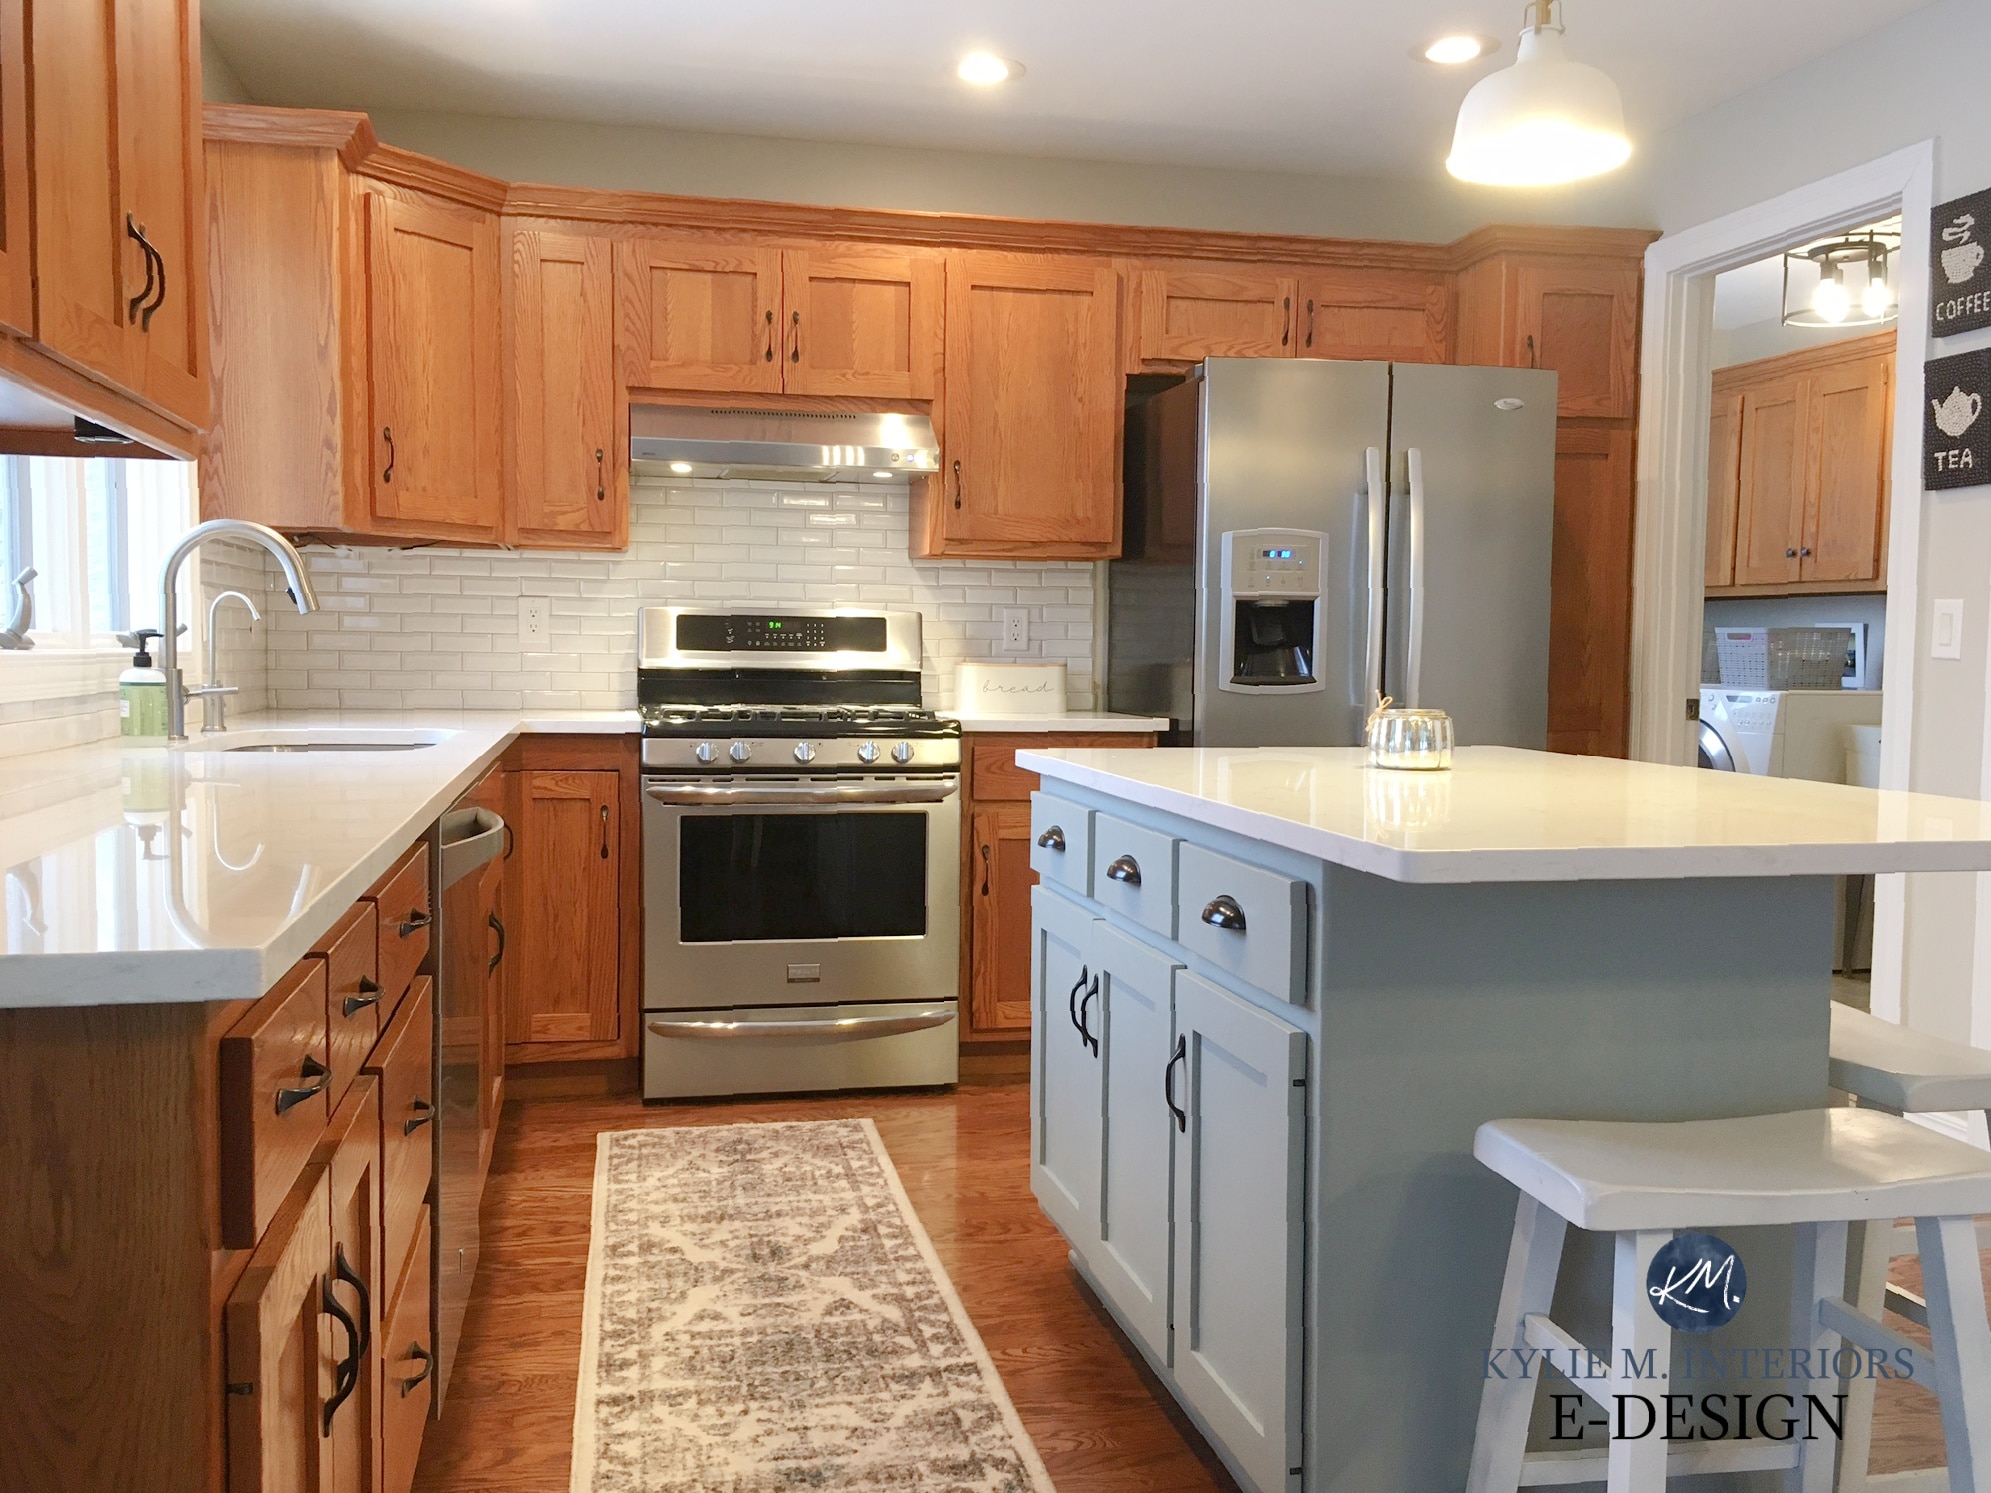 Update Oak Or Wood Cabinets Without A, Oak Kitchen Cabinets With Quartz Countertops